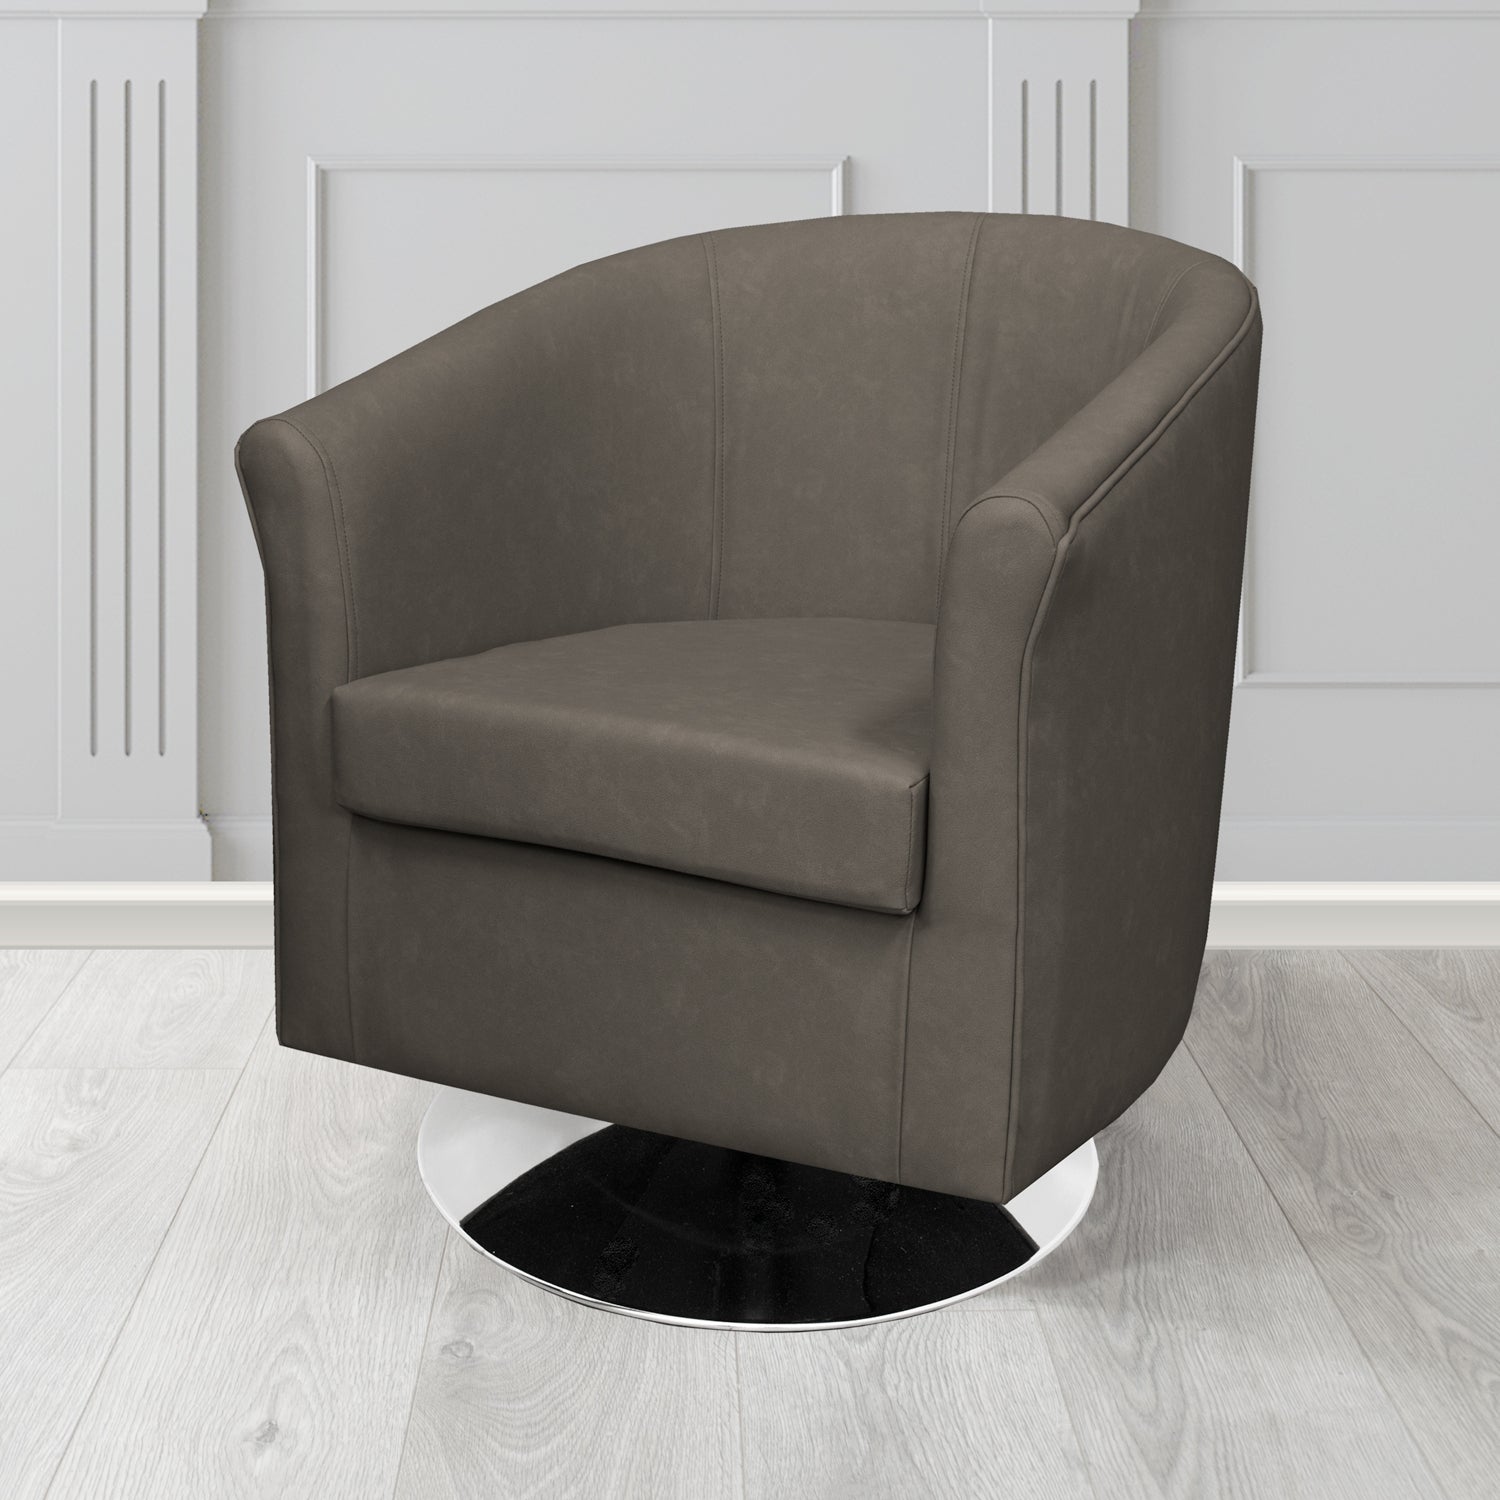 Tuscany Swivel Tub Chair in Infiniti Espresso INF1851 Antimicrobial Crib 5 Faux Leather - The Tub Chair Shop